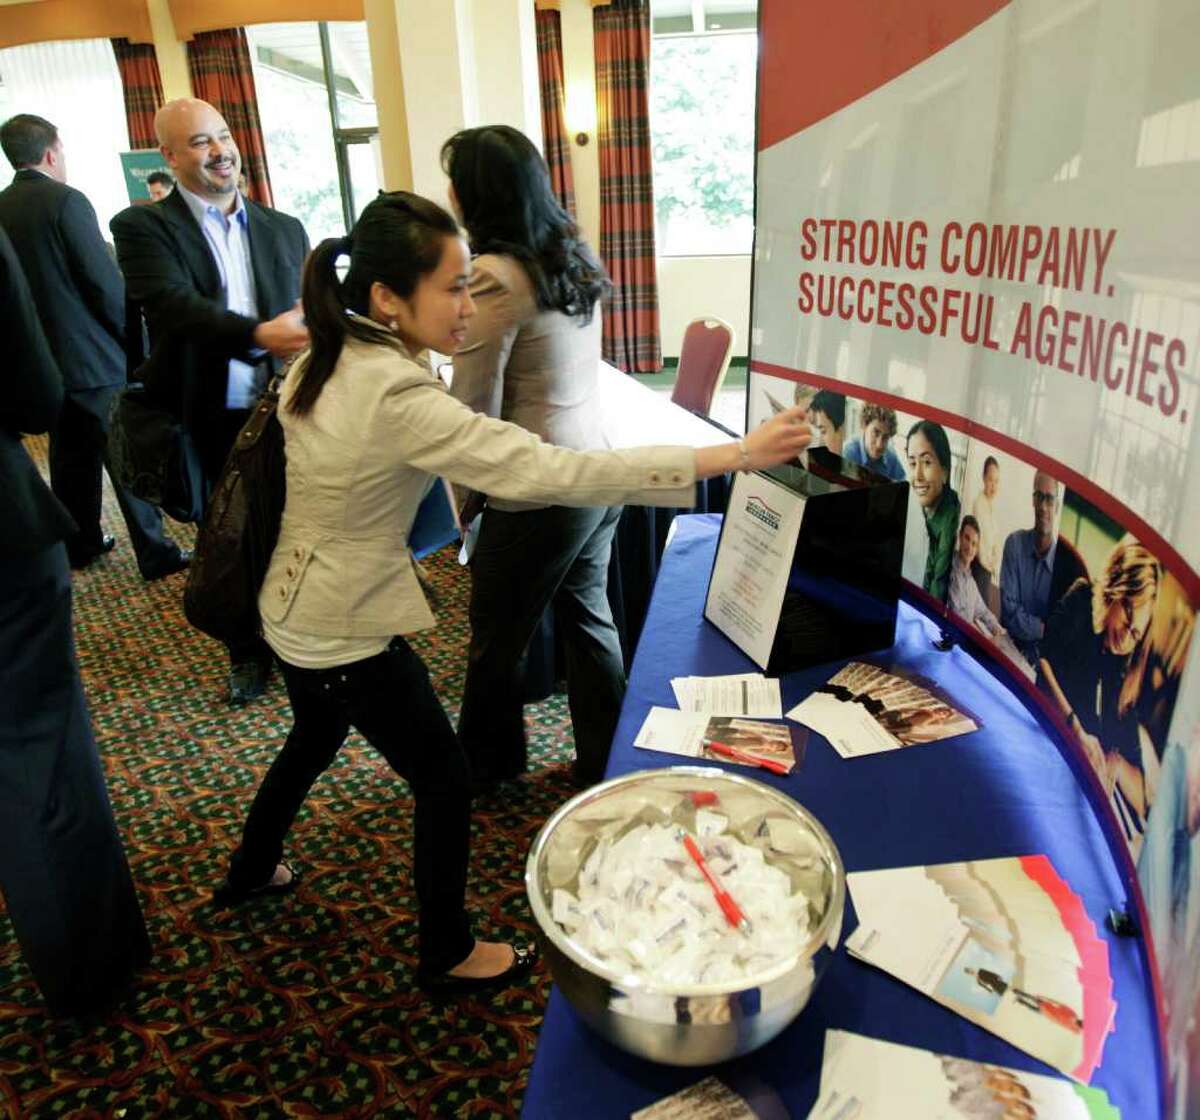 Job-seeker Michael Kautzman, left, talks to Tara Tran, right, a district manager for American Family Insurance, about employment possibilities as Linh Phung, center, puts a completed form in a collection box, during a National Career Fairs job fair, Wednesday, Sept. 14, 2011, in Bellevue, Wash. The number of people applying for unemployment benefits last week jumped to the highest level in three months, a sign that layoffs could be increasing. (AP Photo/Ted S. Warren)